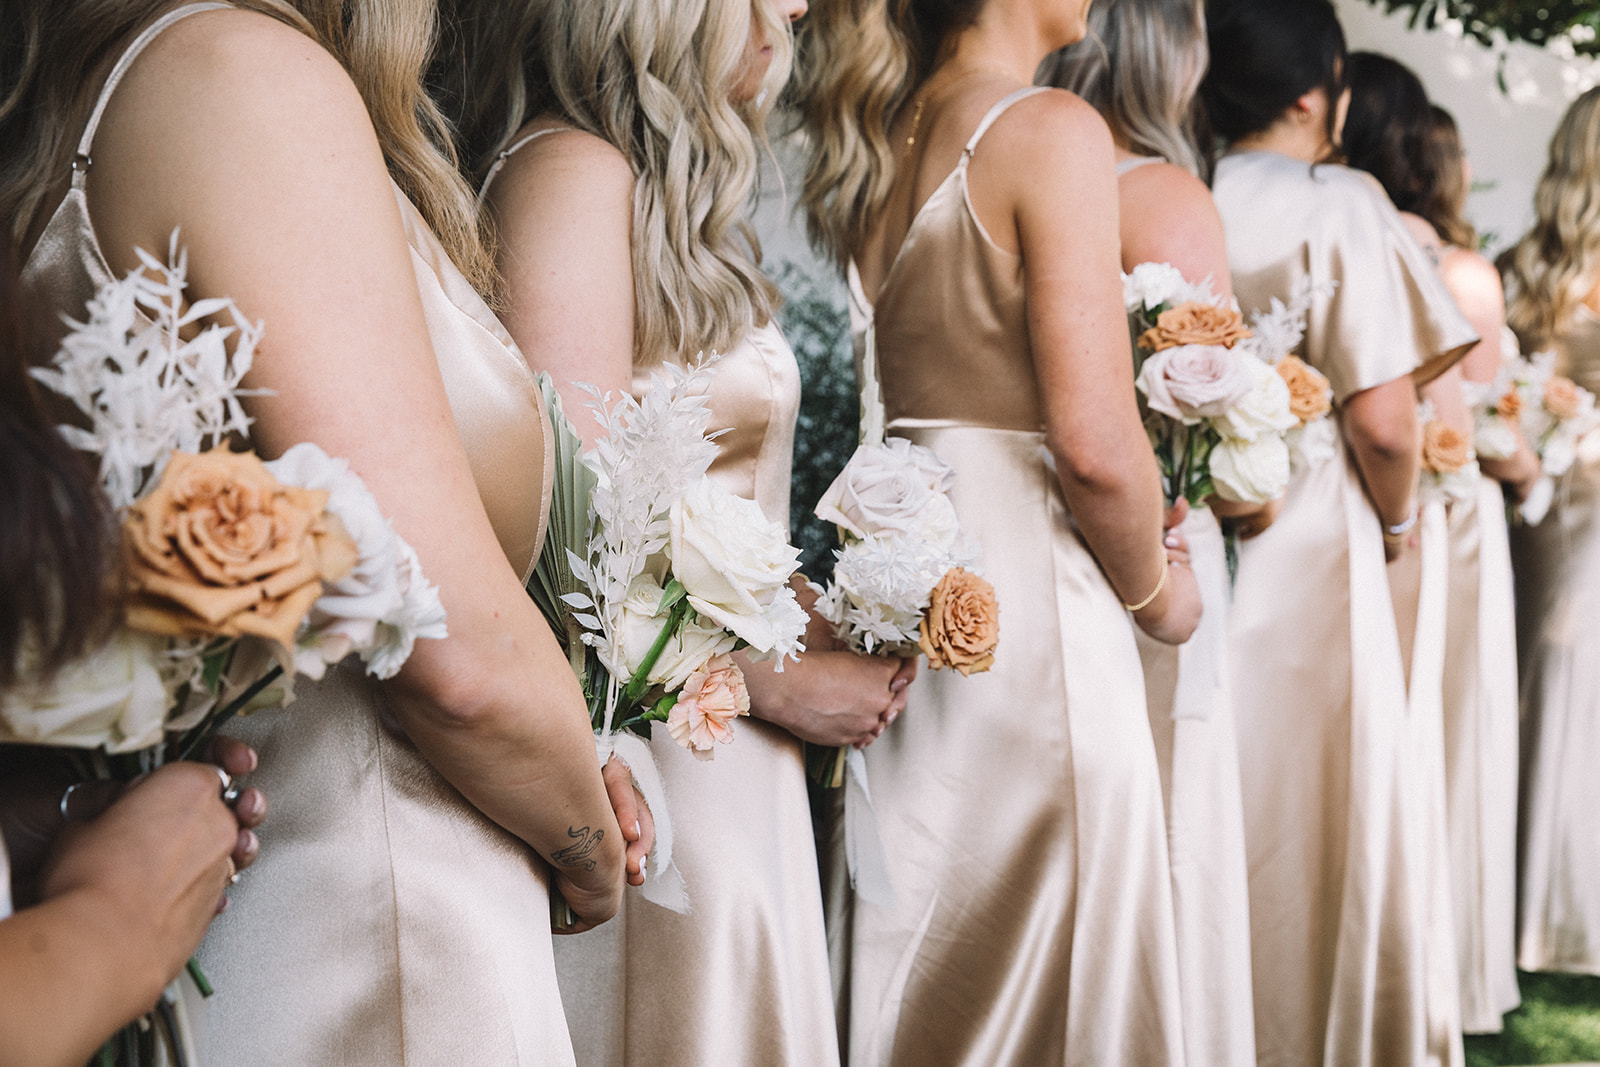 Bridesmaids wear neutral dresses and hold neutral floral bouquets. 